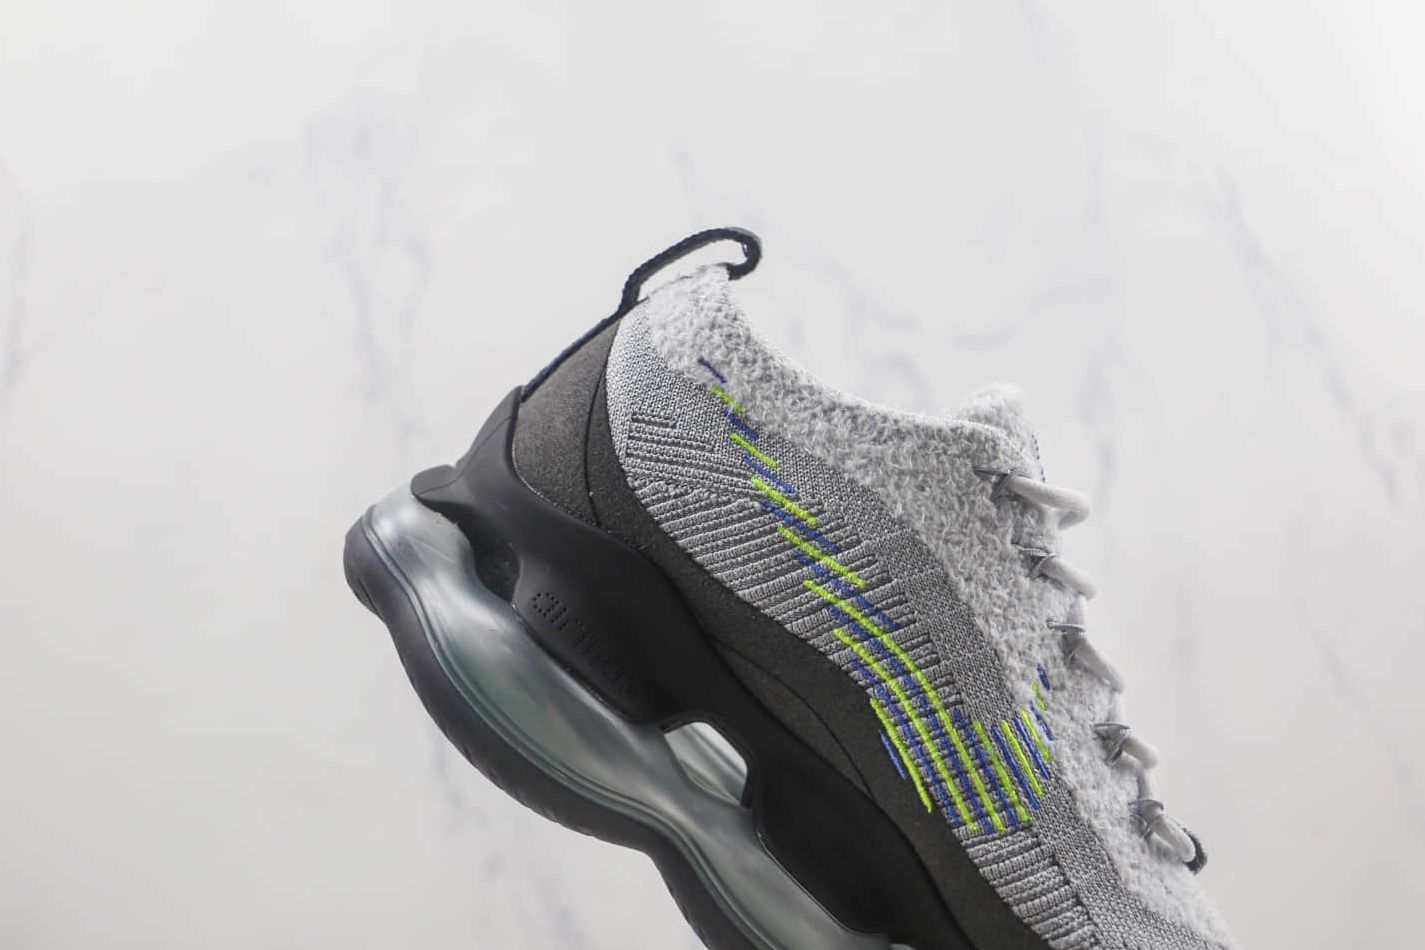 Nike Air Max Scorpion Flyknit 'Wolf Grey Volt' DJ4701-002 - Shop now for the latest Nike sneakers!